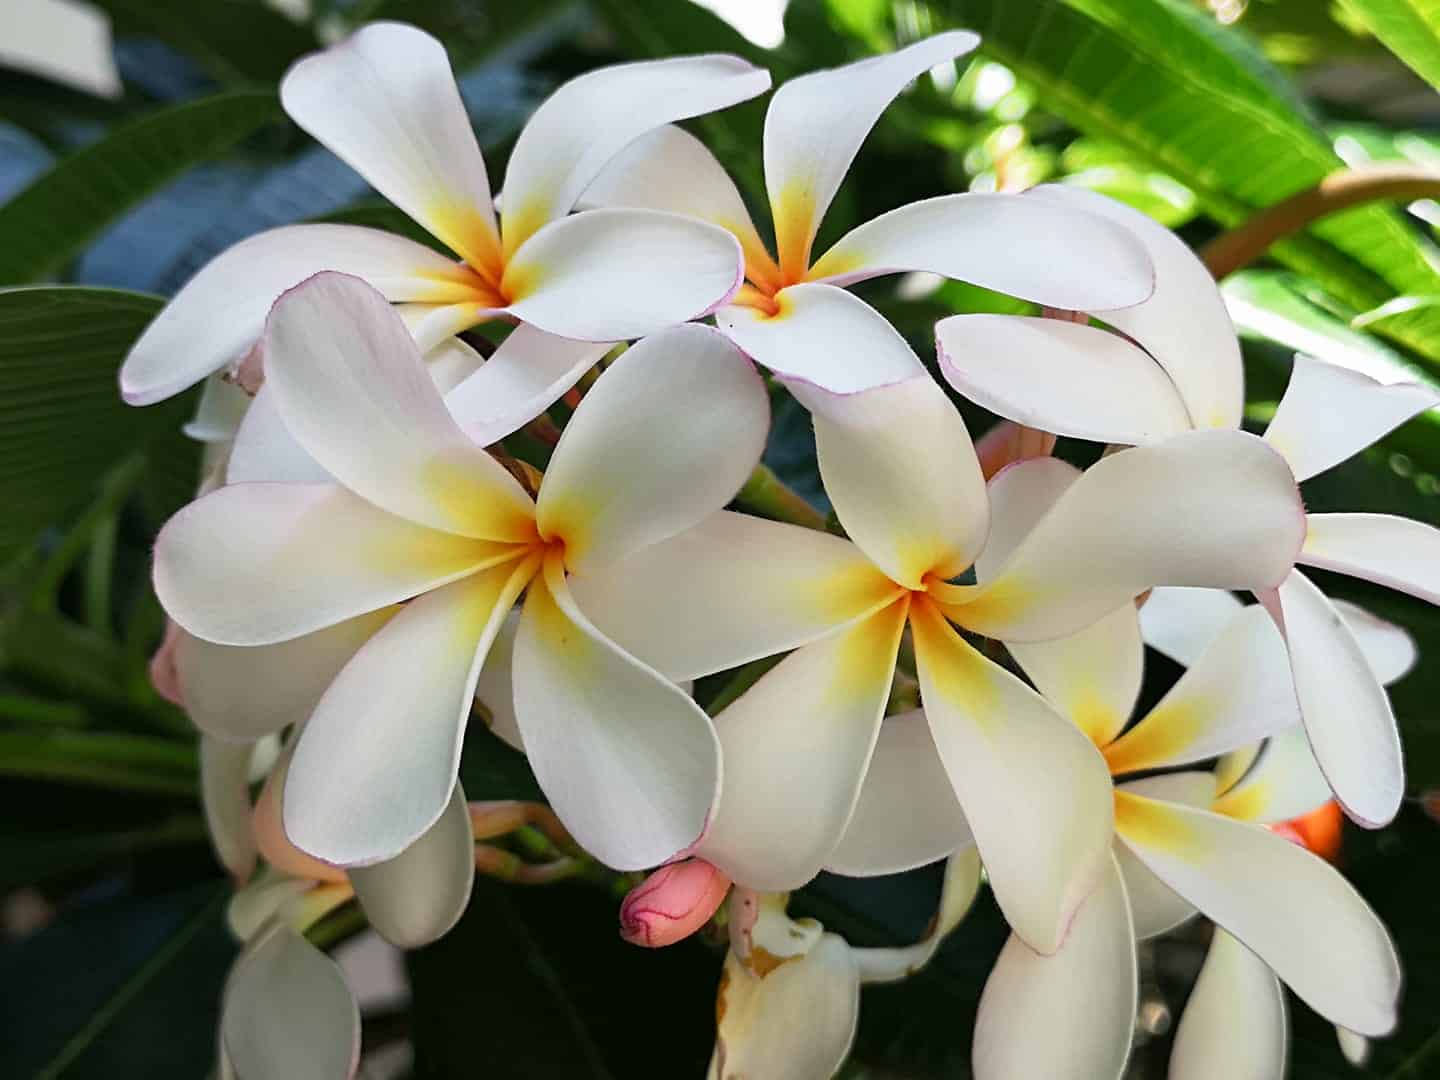 Aloha Friday Photo: Our hope will bloom edition